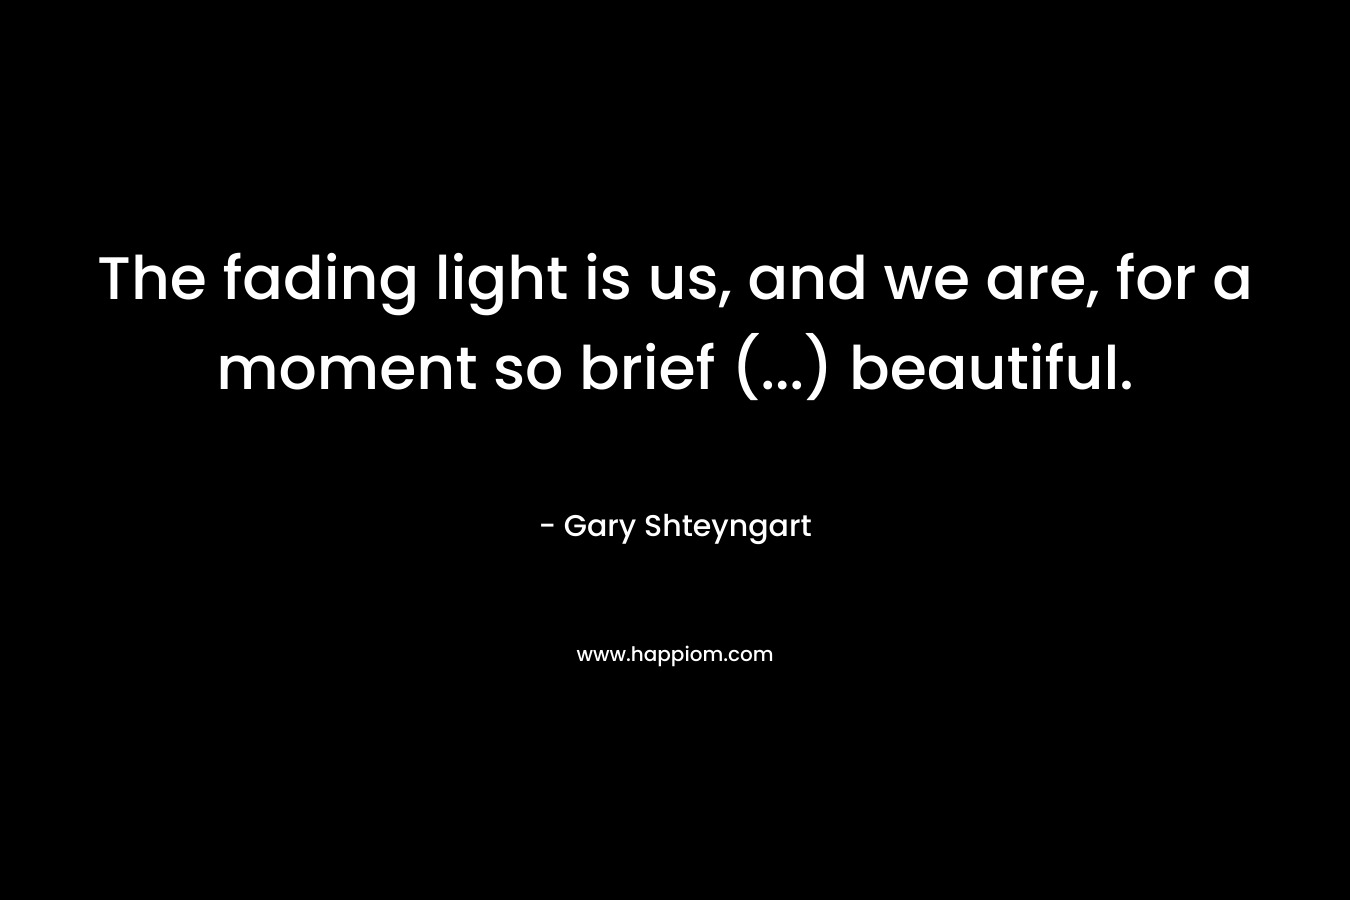 The fading light is us, and we are, for a moment so brief (…) beautiful. – Gary Shteyngart